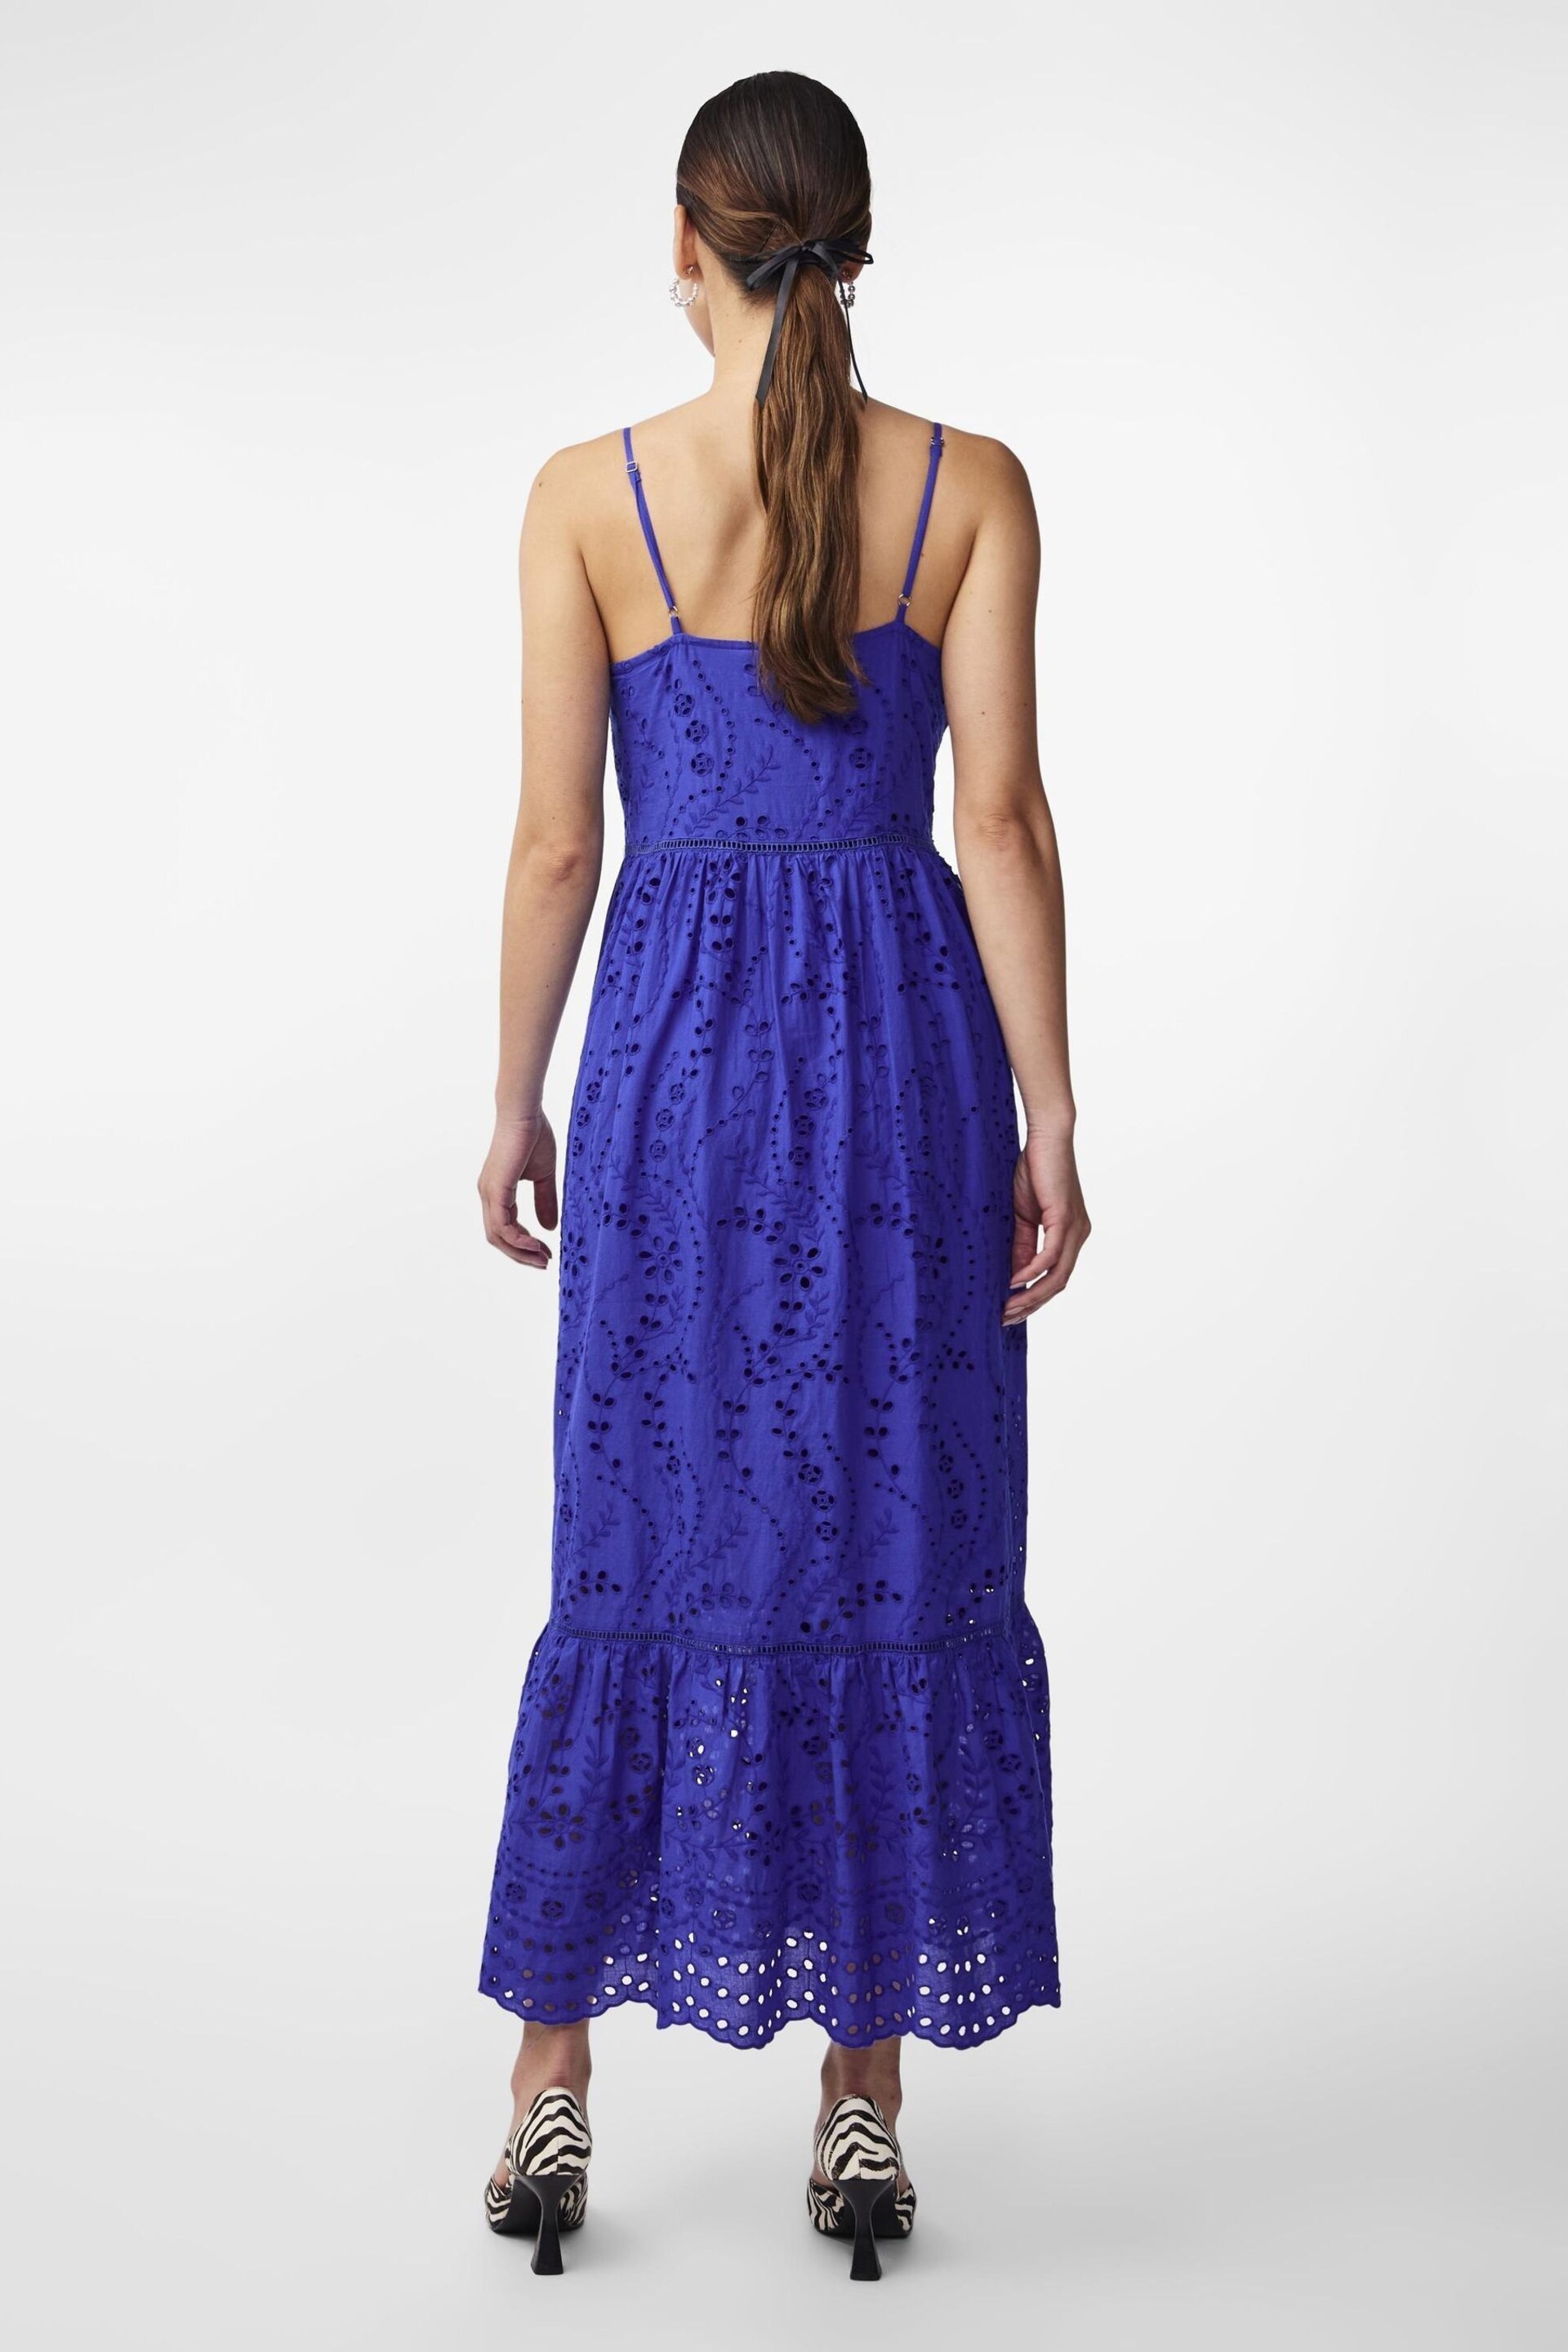 Y.A.S Blue Broderie Maxi Sun Dress - Image 2 of 3